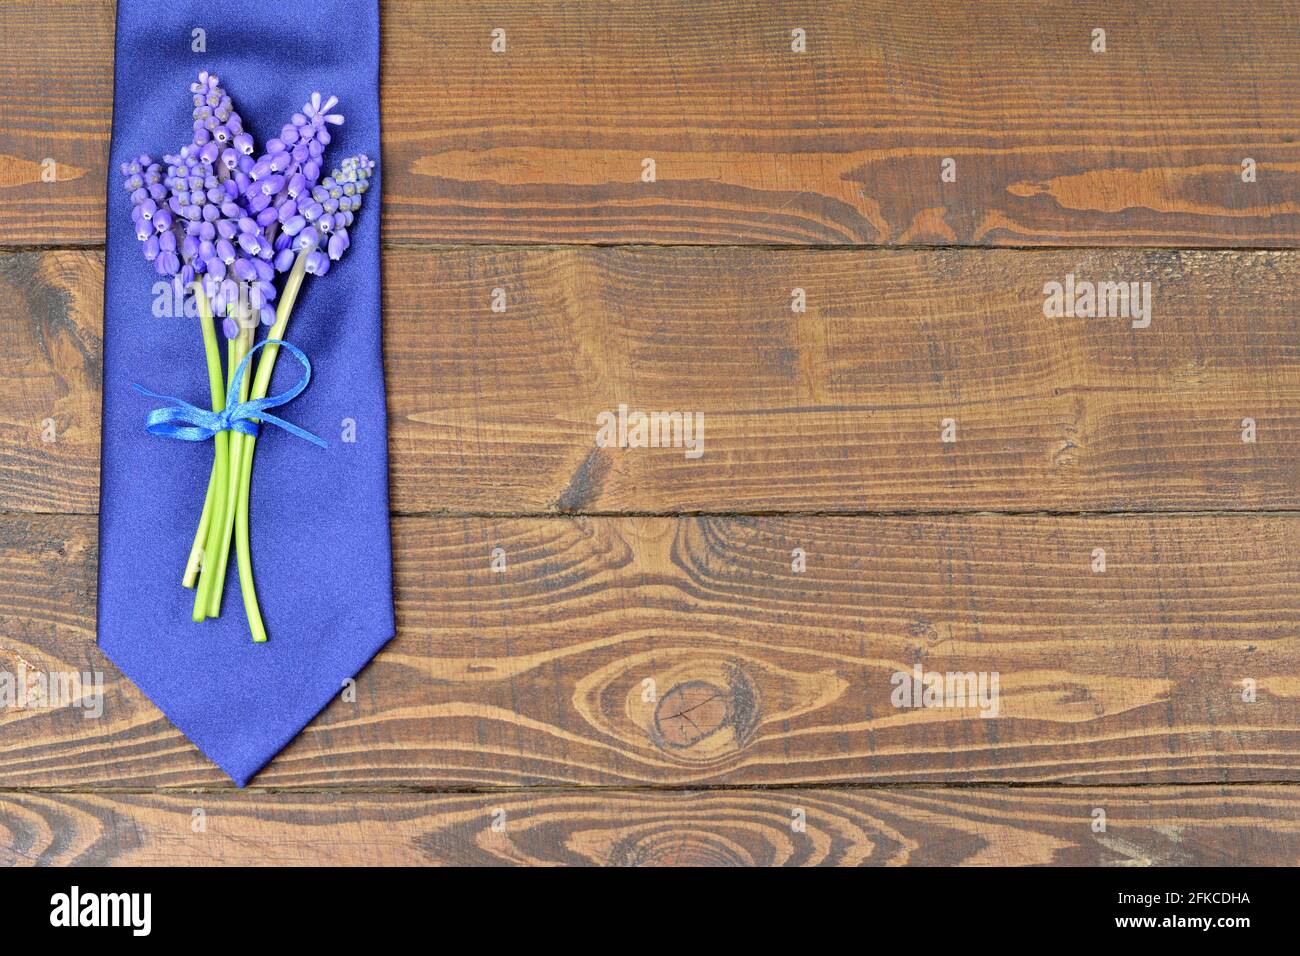 Fathers Day background with blue tie and grape hyacinth flowers Stock Photo